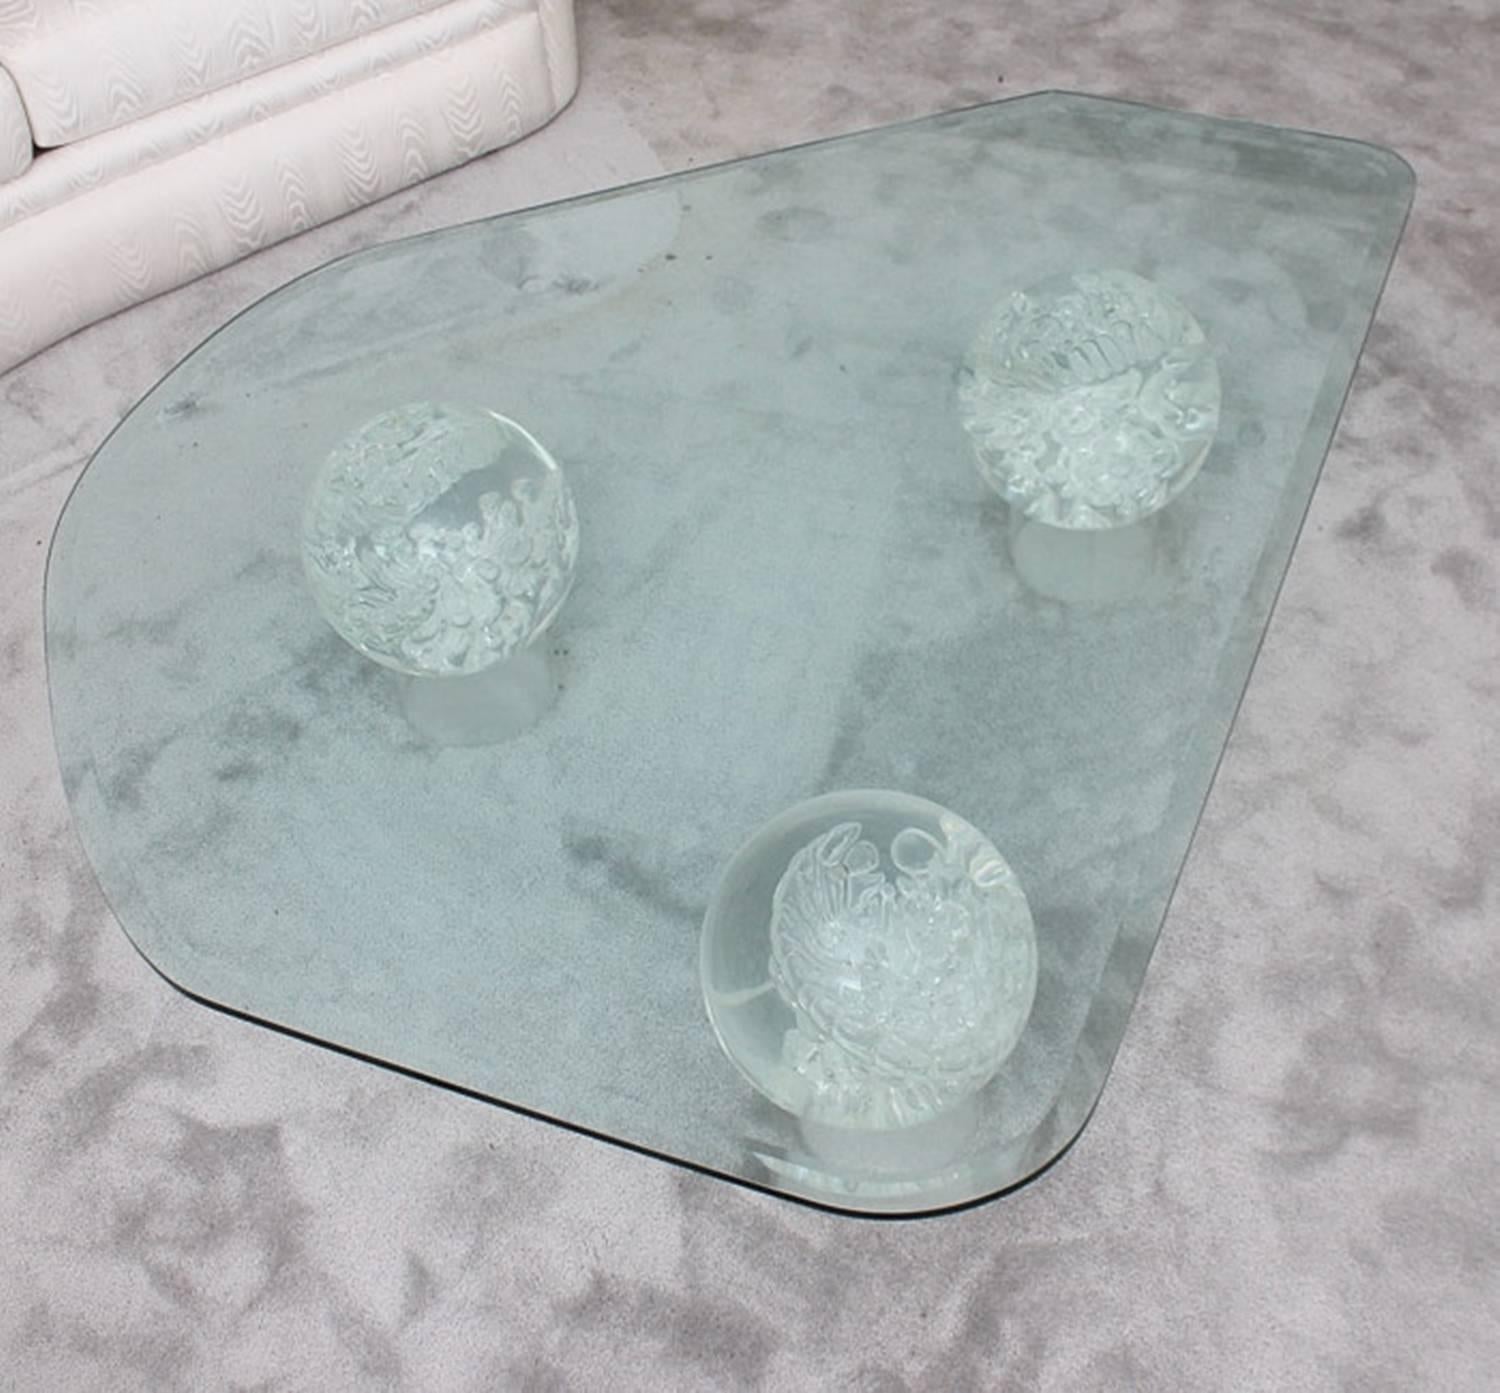 A Mid-Century Modern glass coffee table. This piece features an irregular shaped top, with a beveled edge. The top is elevated on three glass spheres, with bubbles and swirls visible within. Each sphere rests on a clear acrylic cylindrical base. The